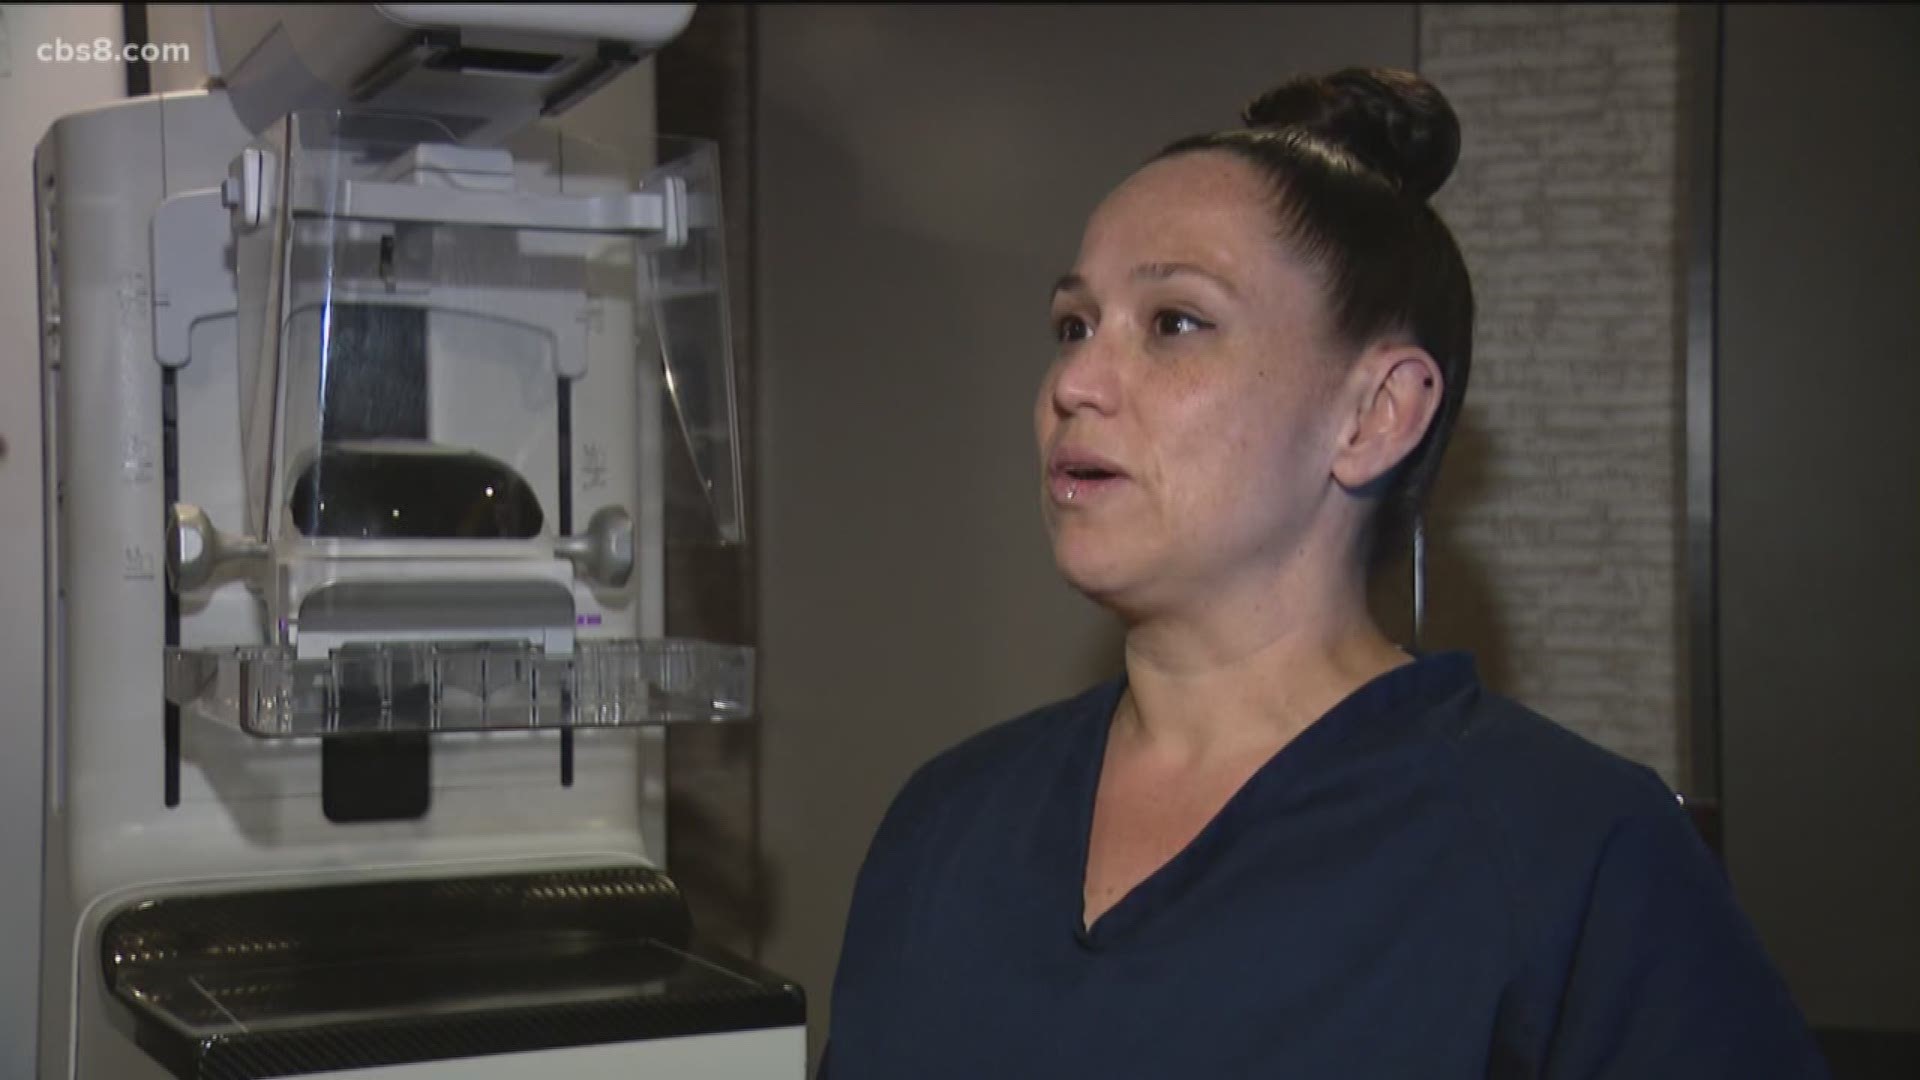 In the last two years, about 500 women inmates have received a mammogram through the program.